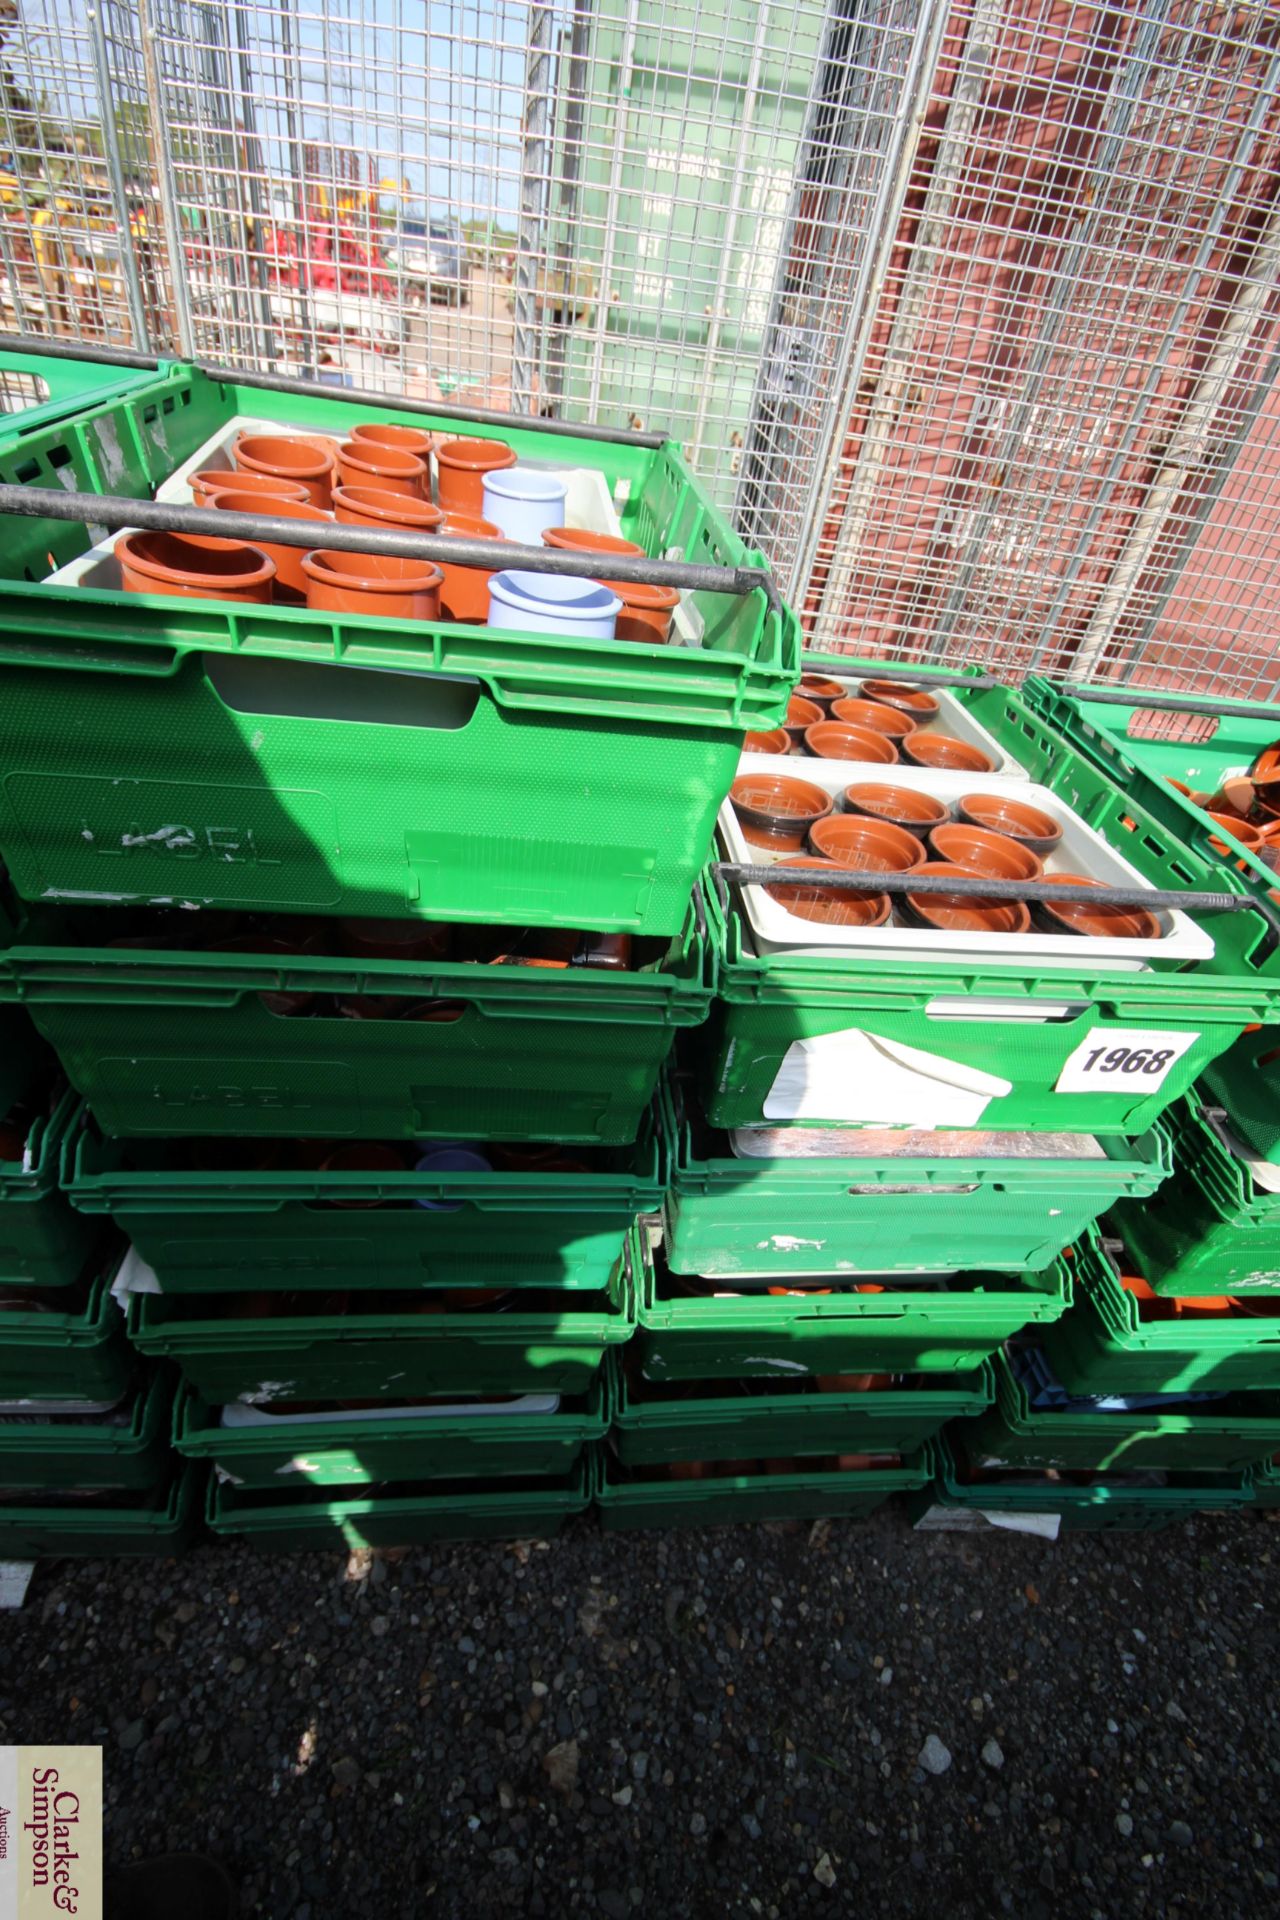 11x stacking vegetable crates. Containing a large